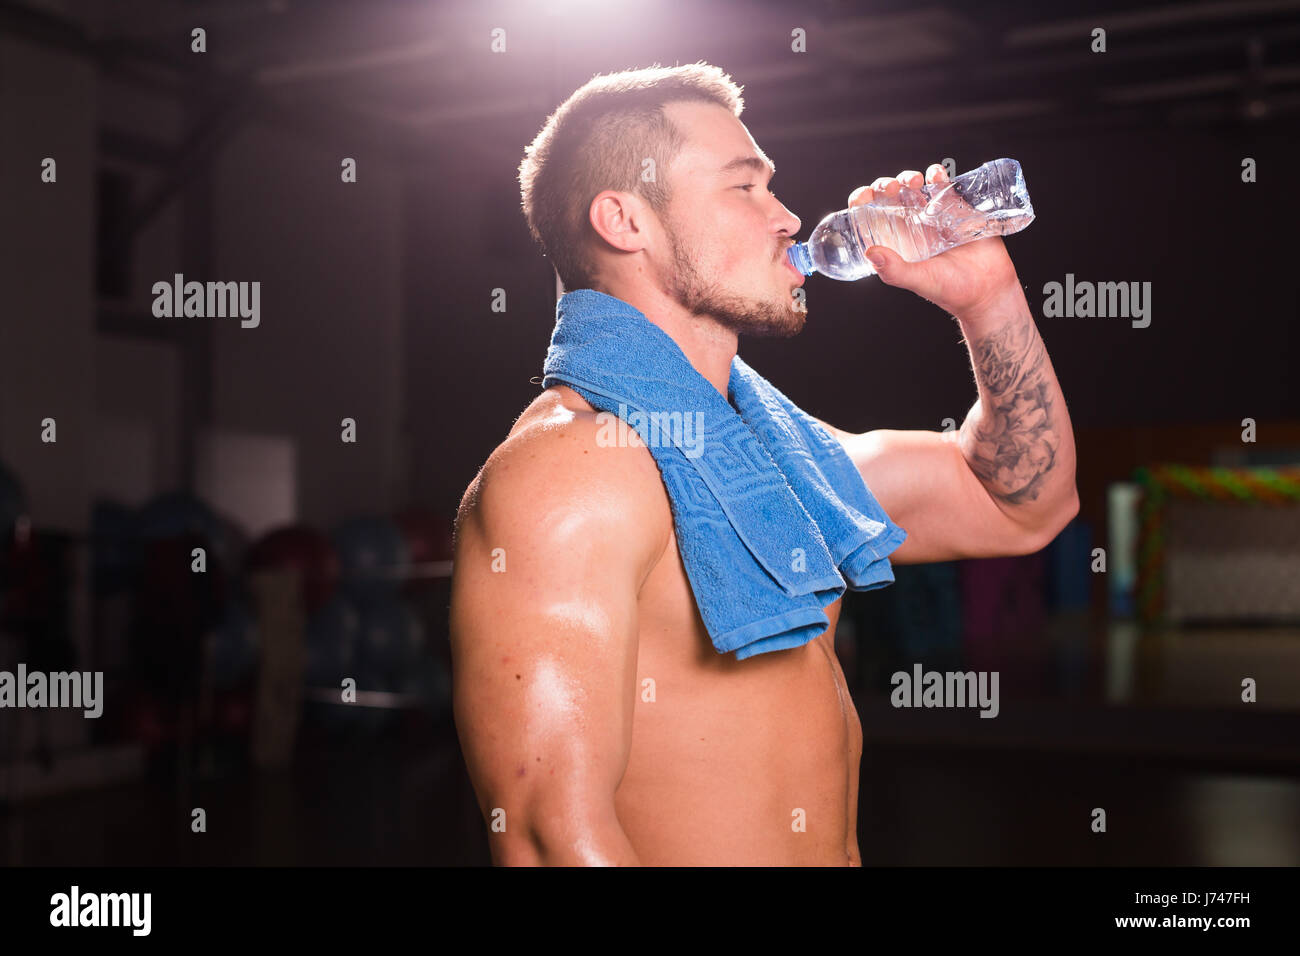 764 Man Drinking Water Bottle In Gym Stock Photos, High-Res Pictures, and  Images - Getty Images